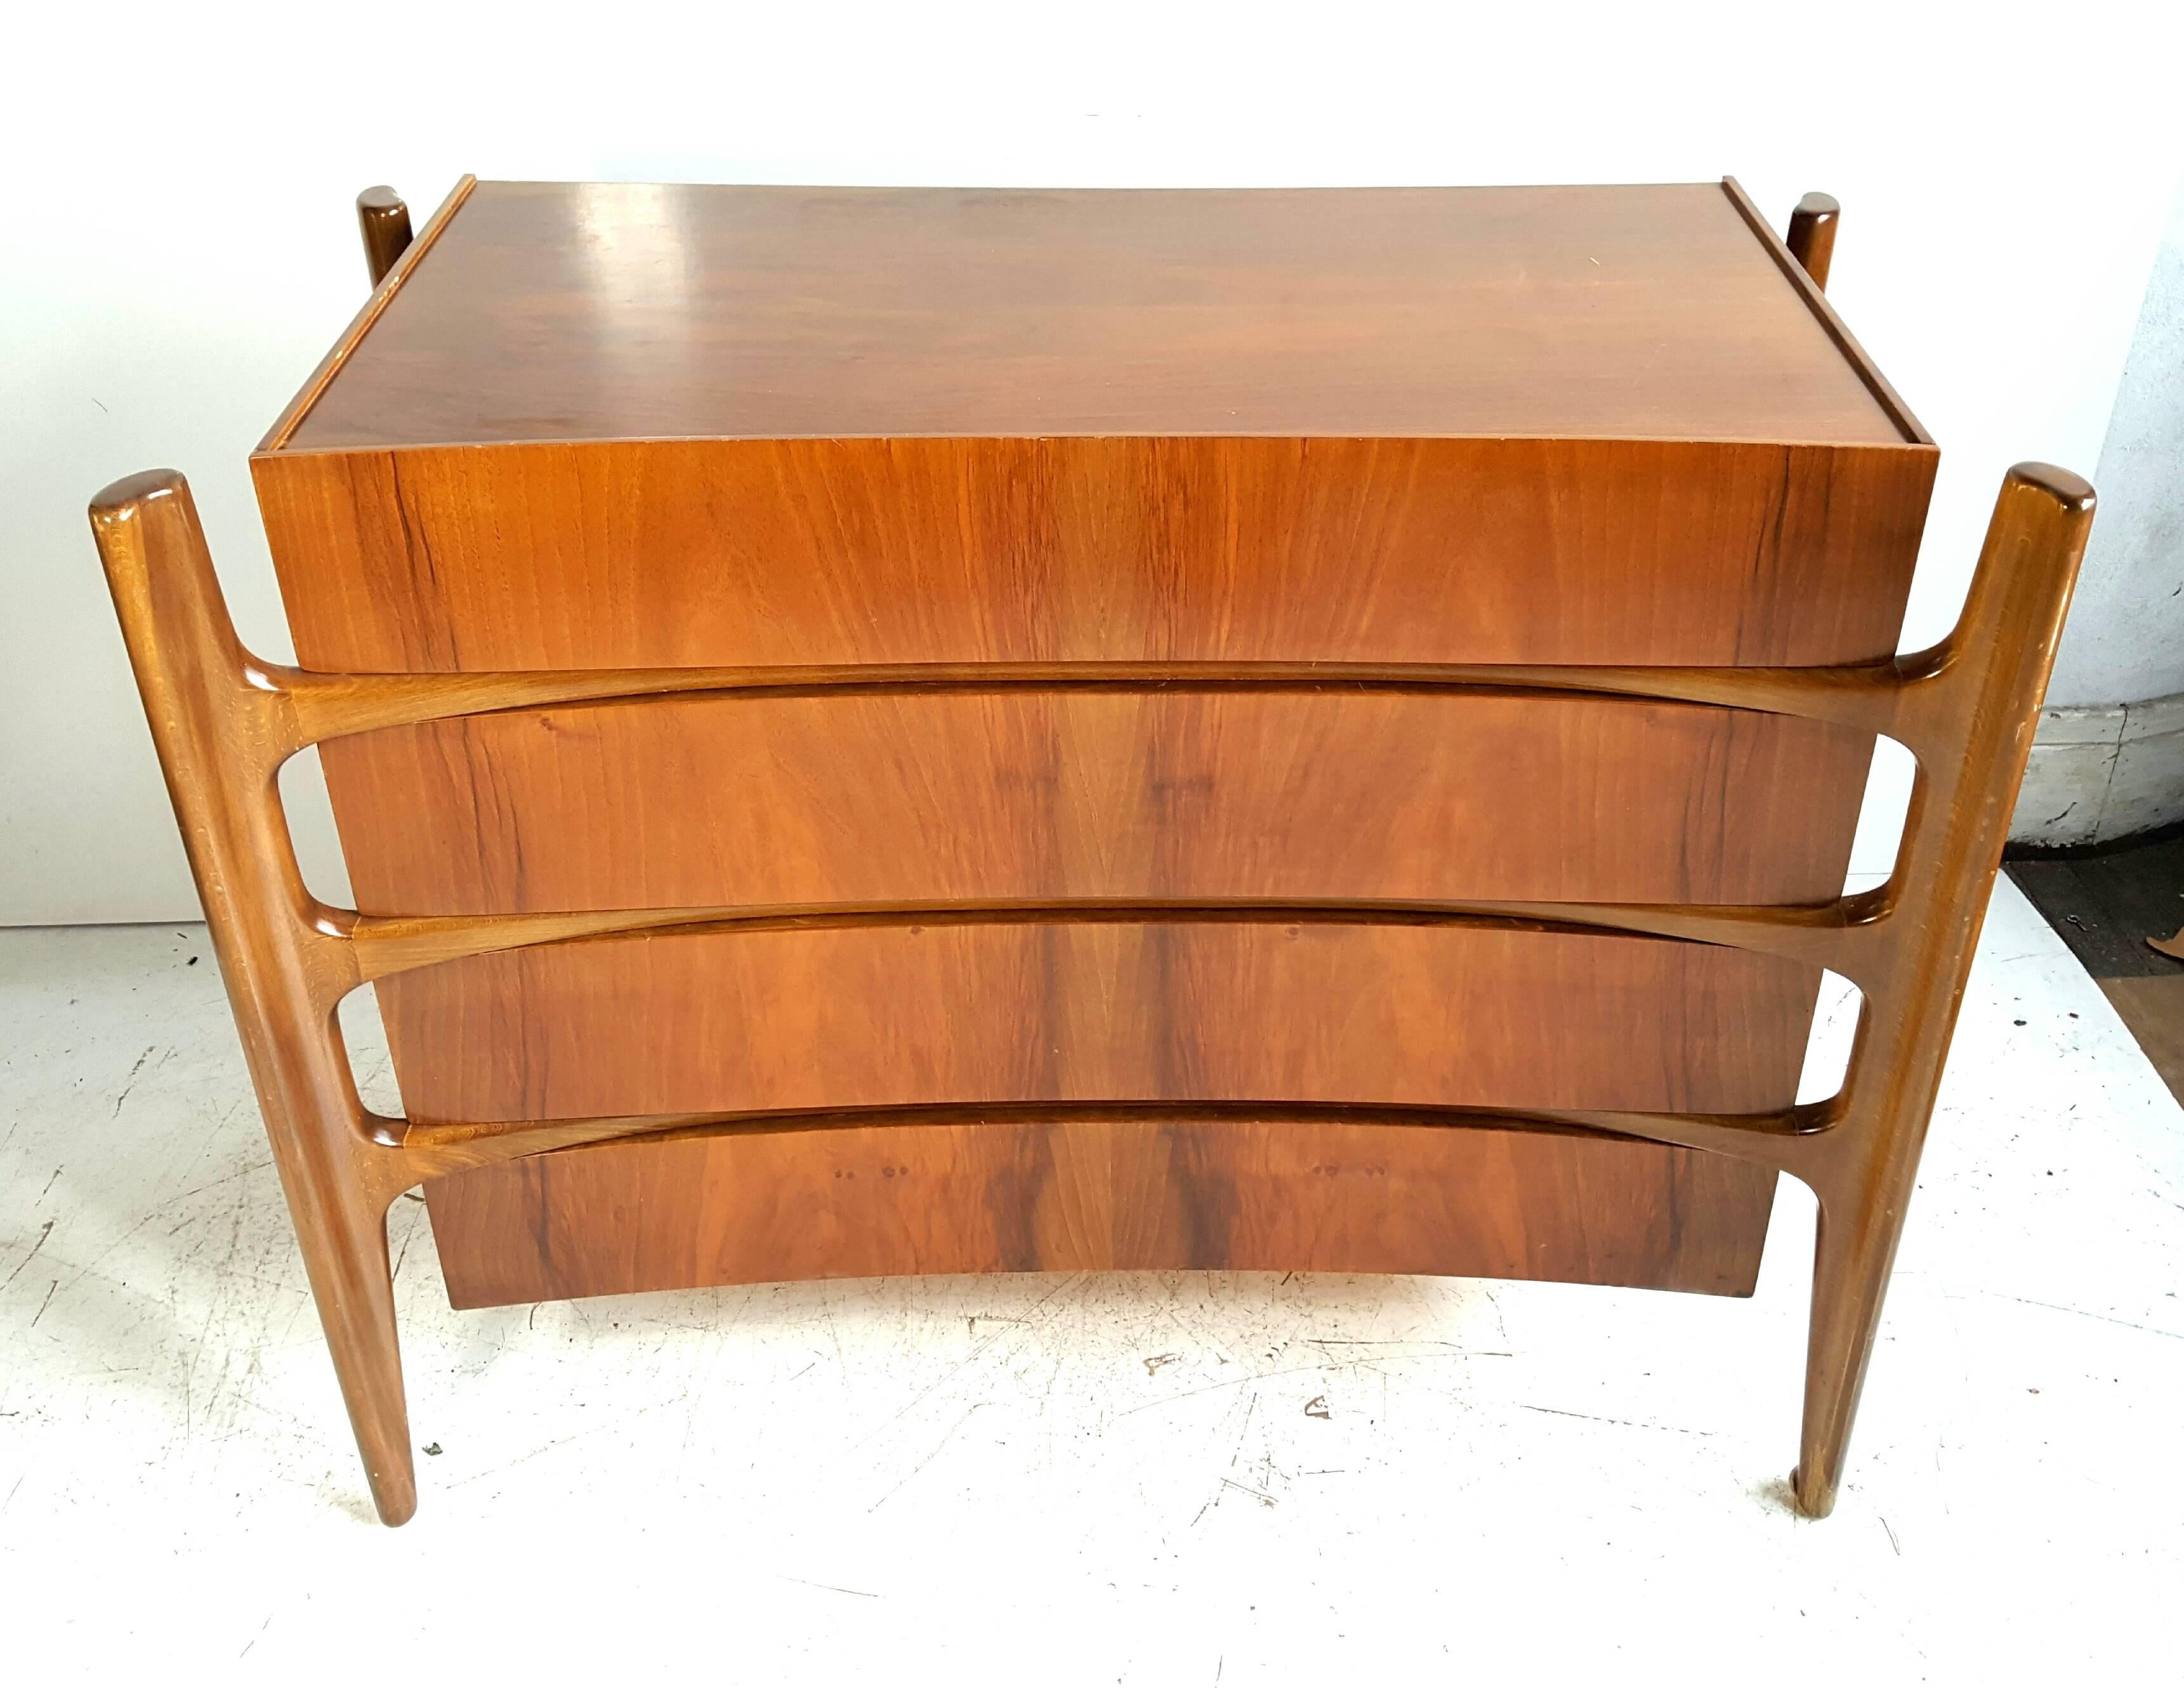 Four-drawer chest by William Hinn for Urban Furniture Sweden, 1950s.

Beautiful curved chest or dresser. This piece shows an exquisite organic and amorphic design. The wooden frame reminds of a skeleton, the large set of drawers completes the